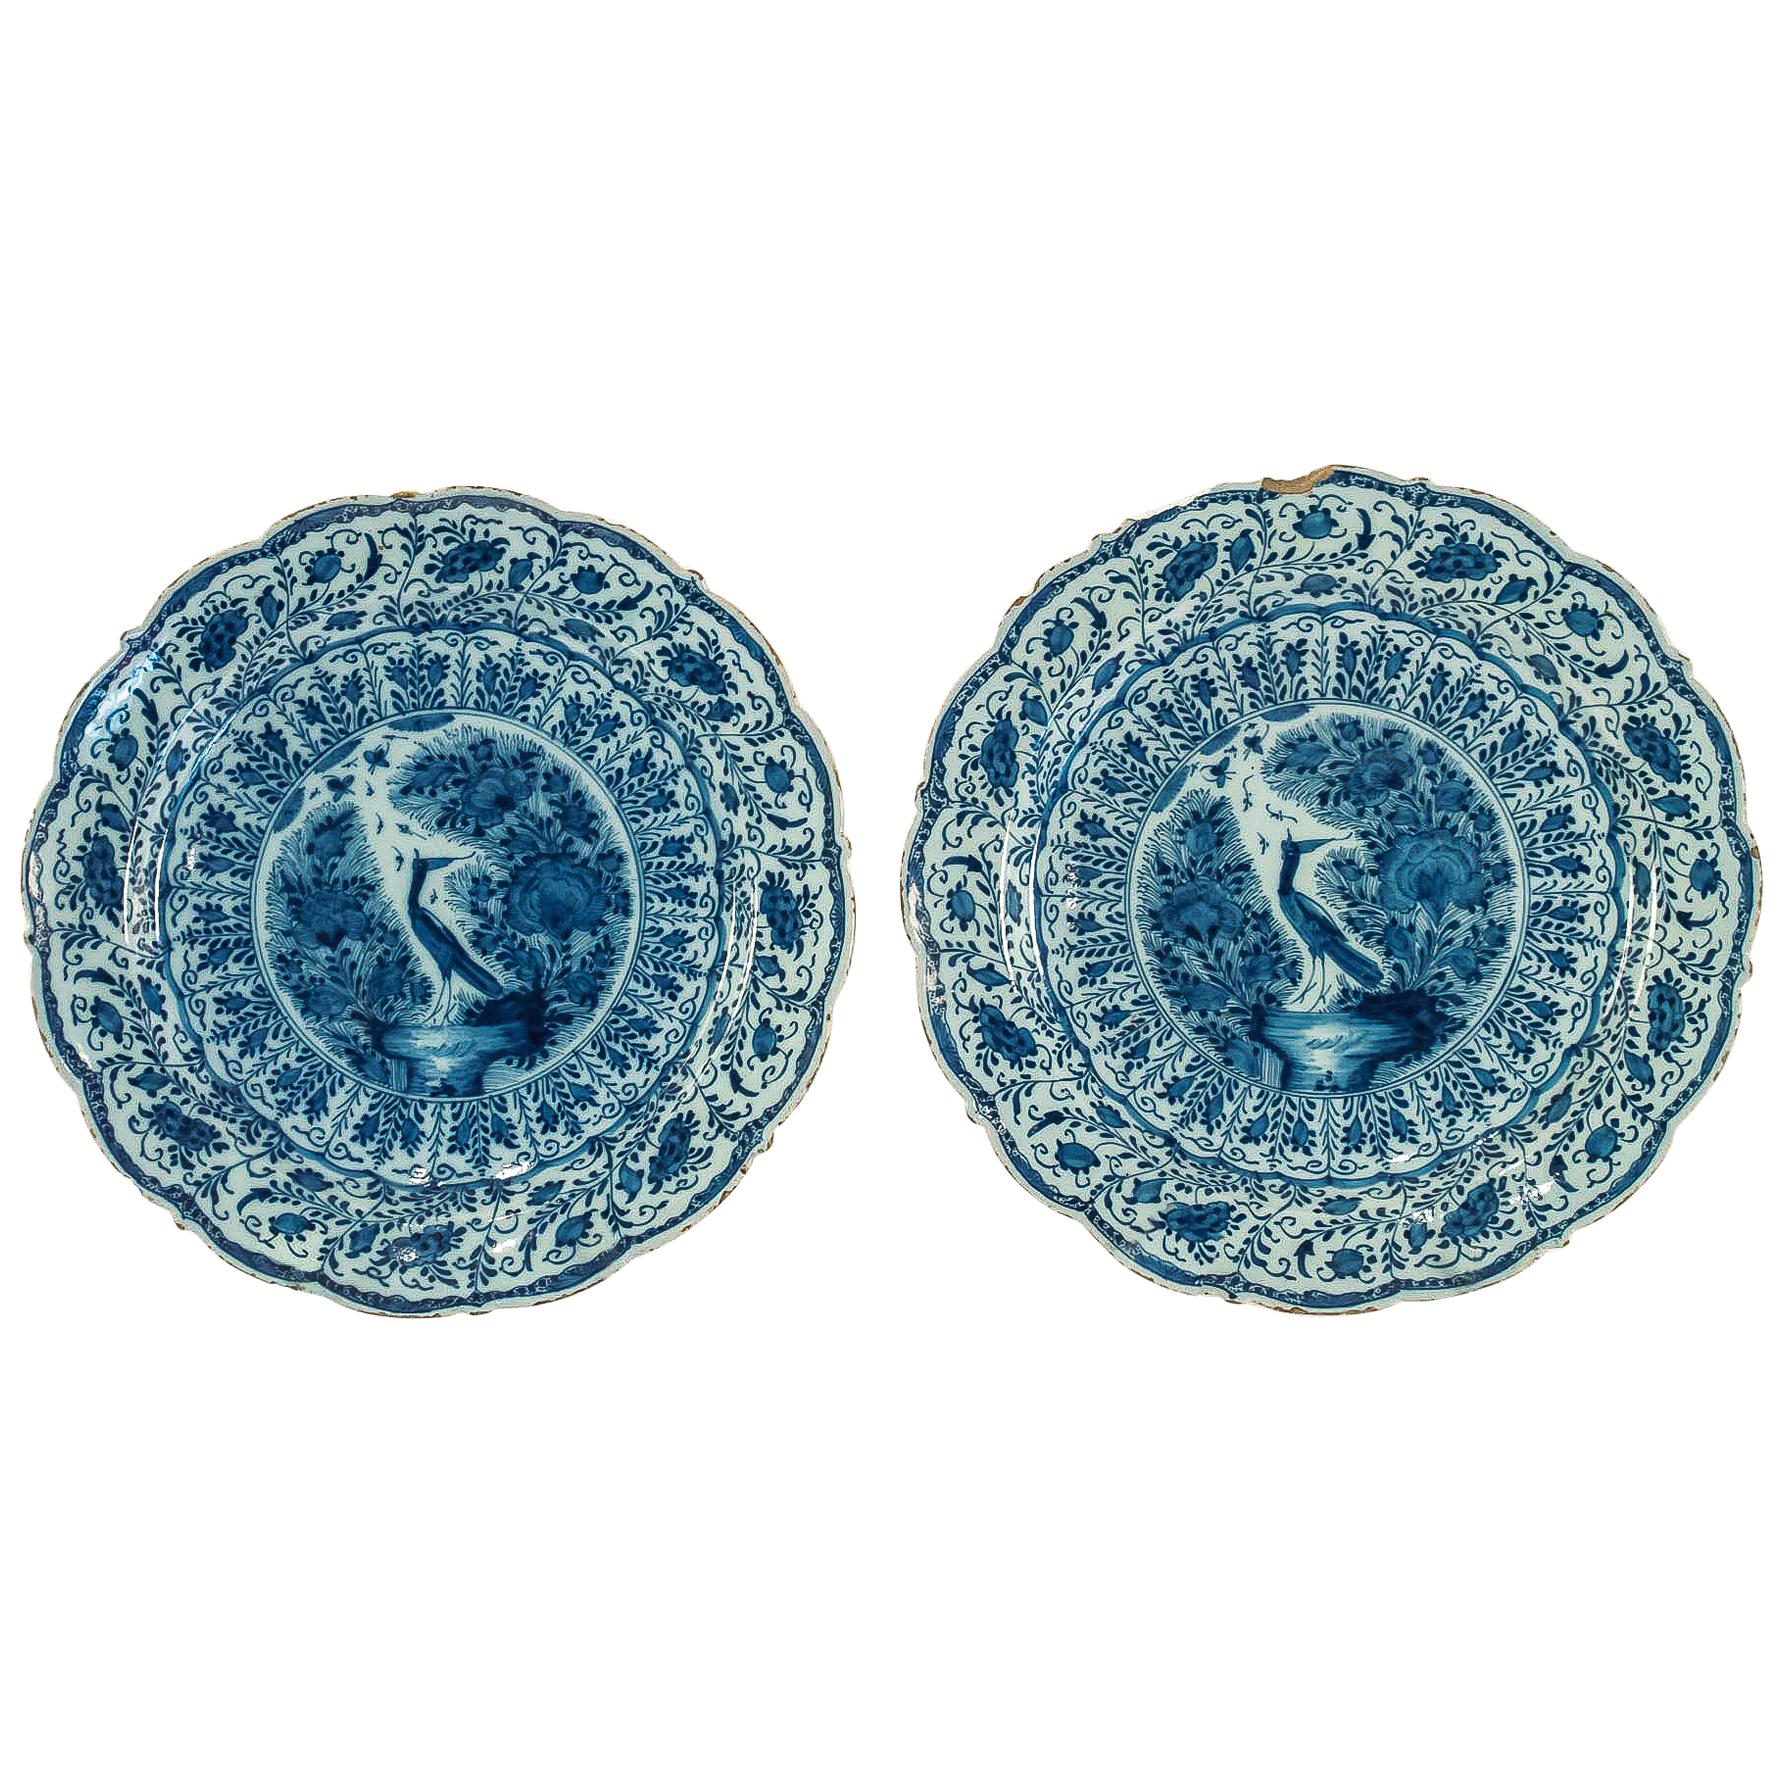 Sign by Ax, Mid-18th Century, Magnificent Pair of Faience Delft Round Dishes